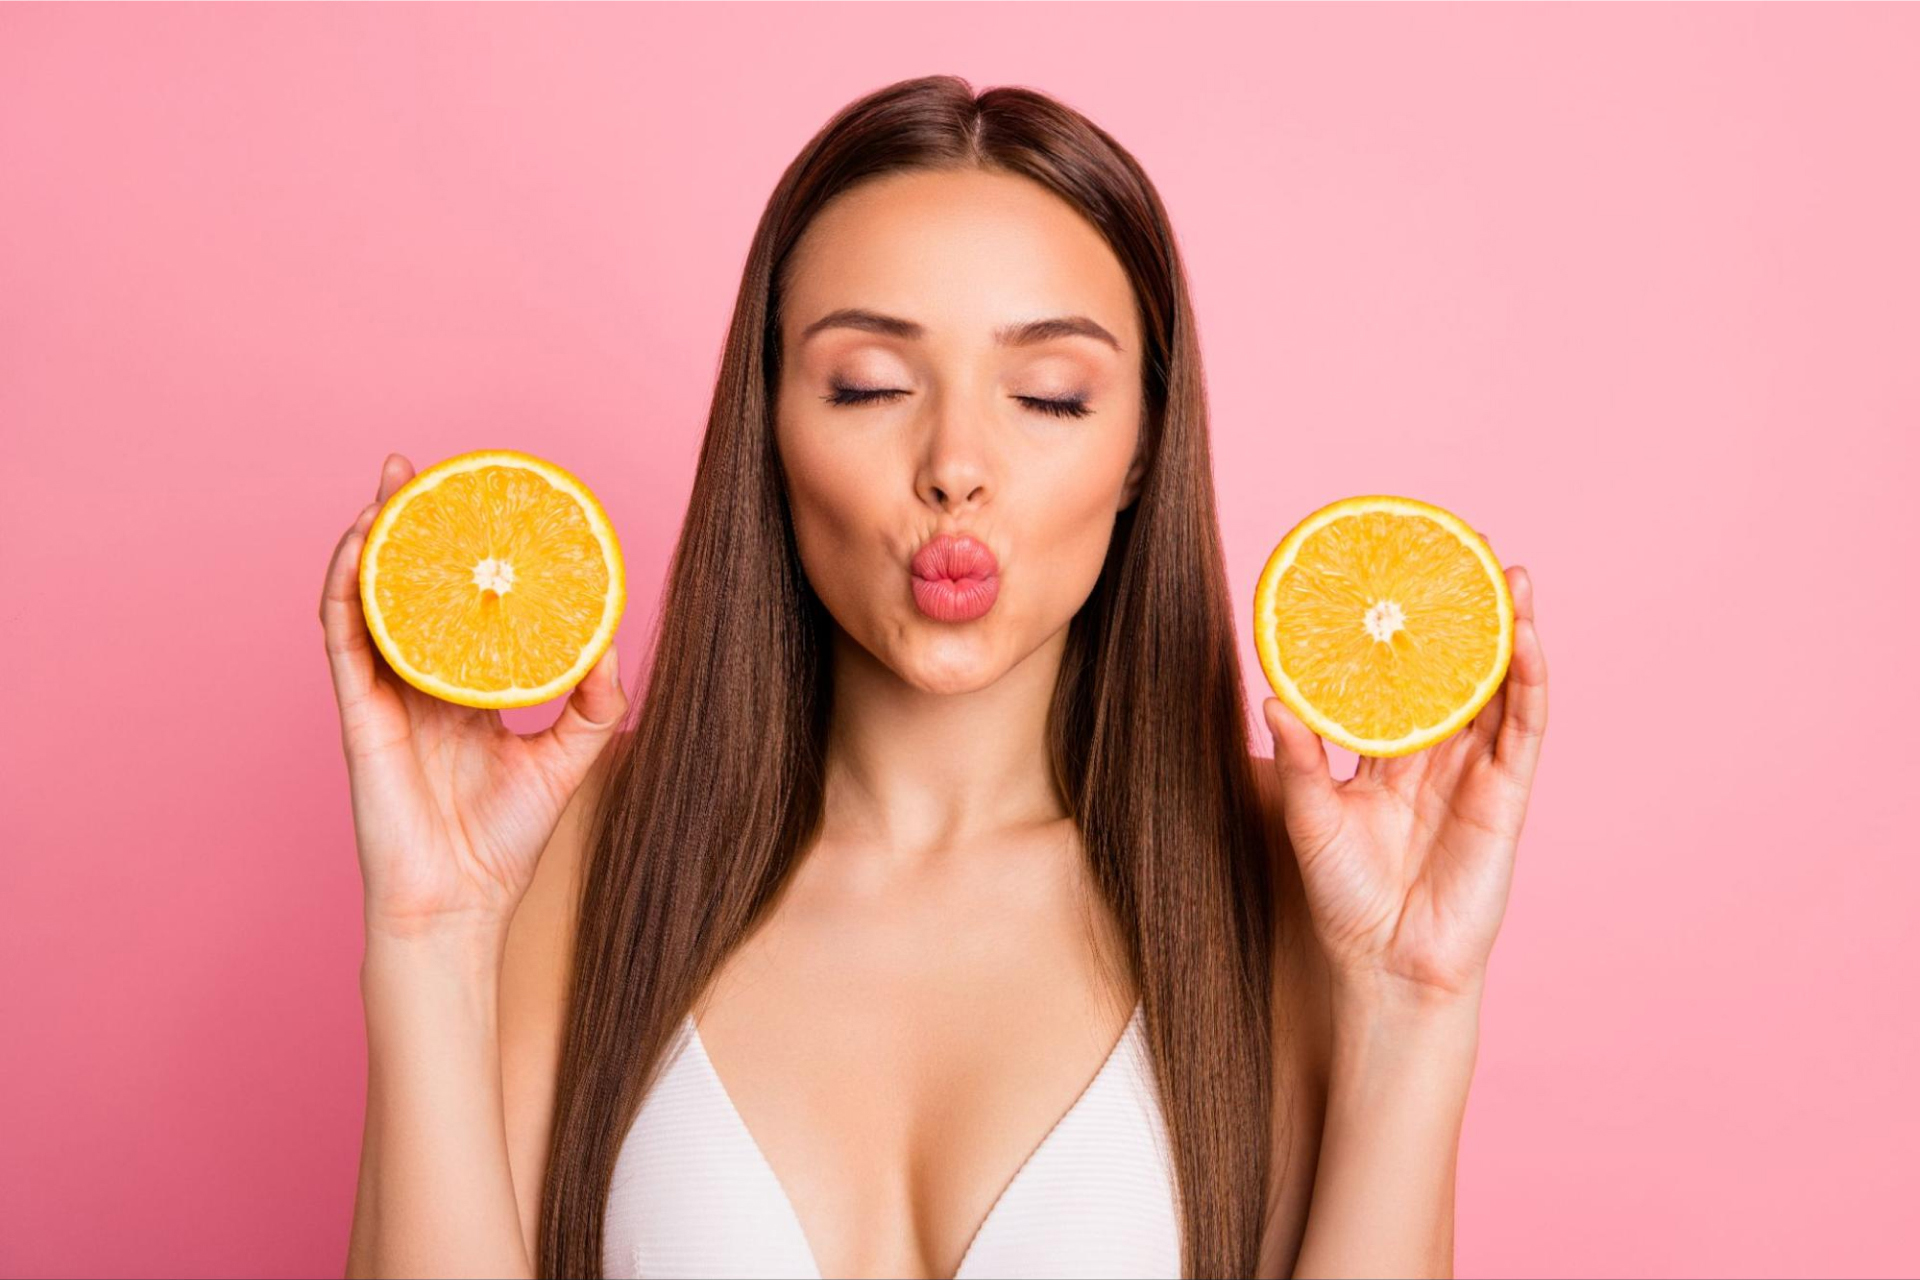 A woman with full lips closes her eyes while holding two slices of orange